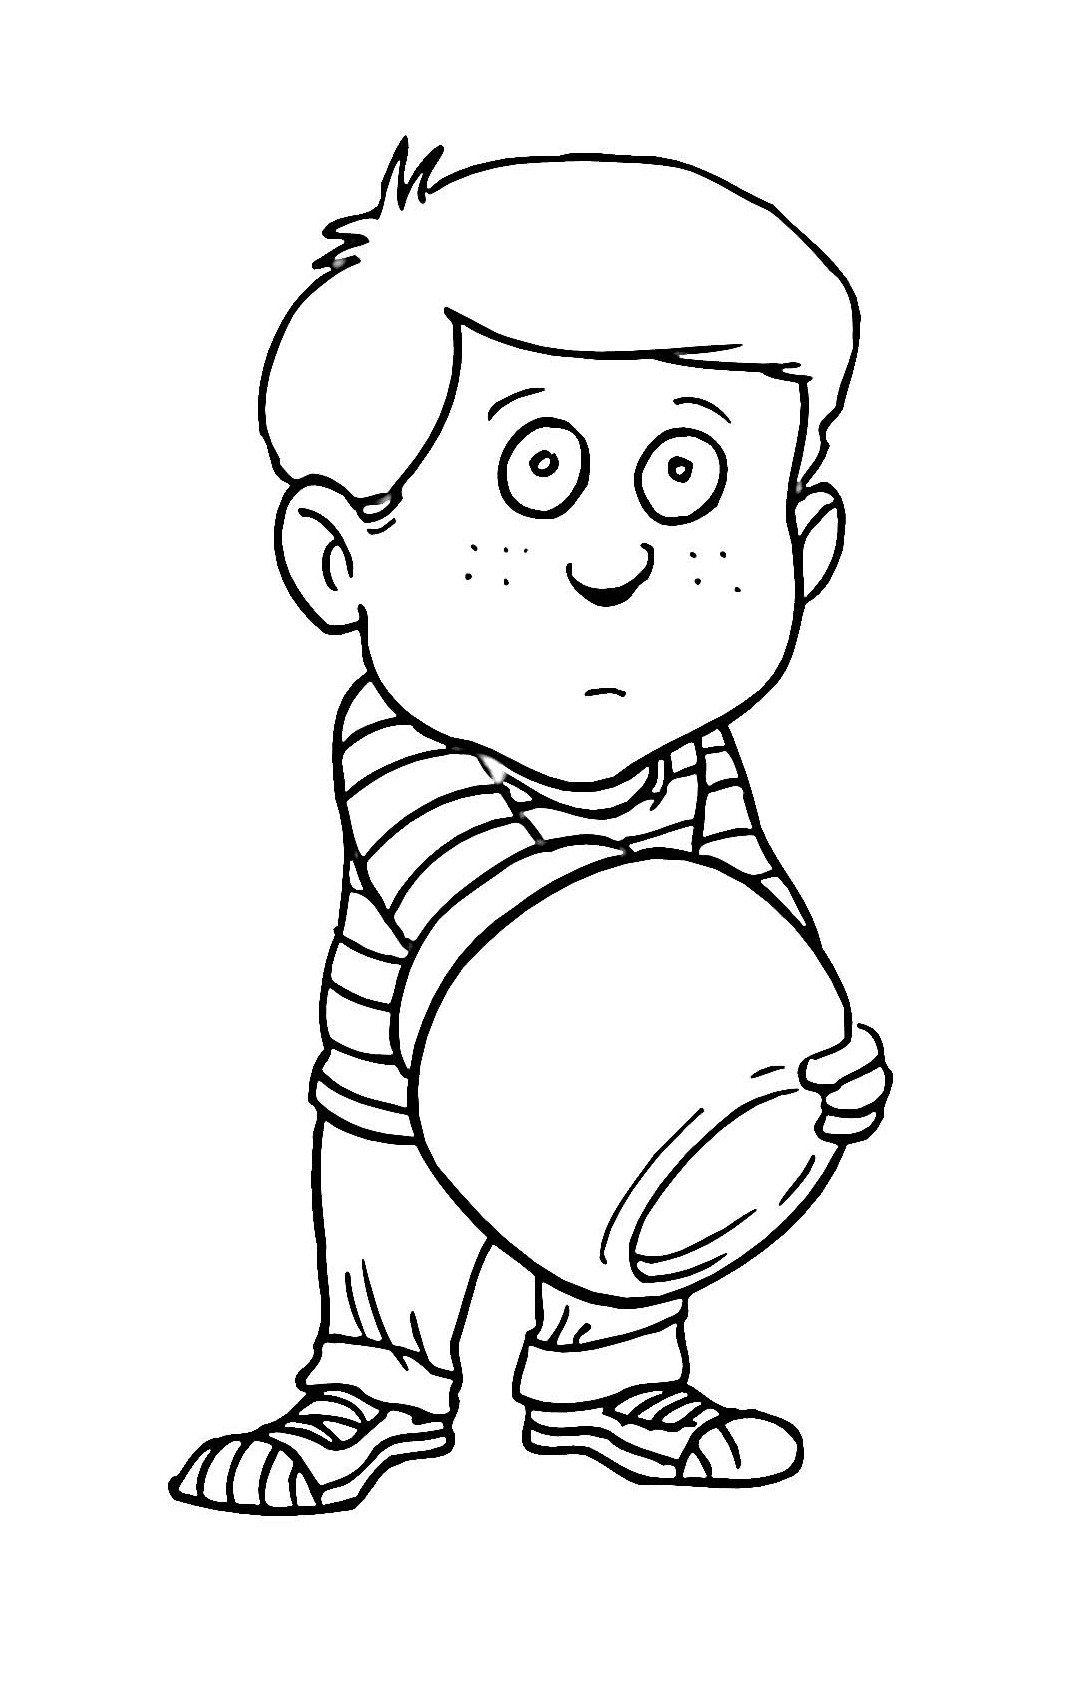 Coloring Sheets For Boys Printable
 Free Printable Boy Coloring Pages For Kids